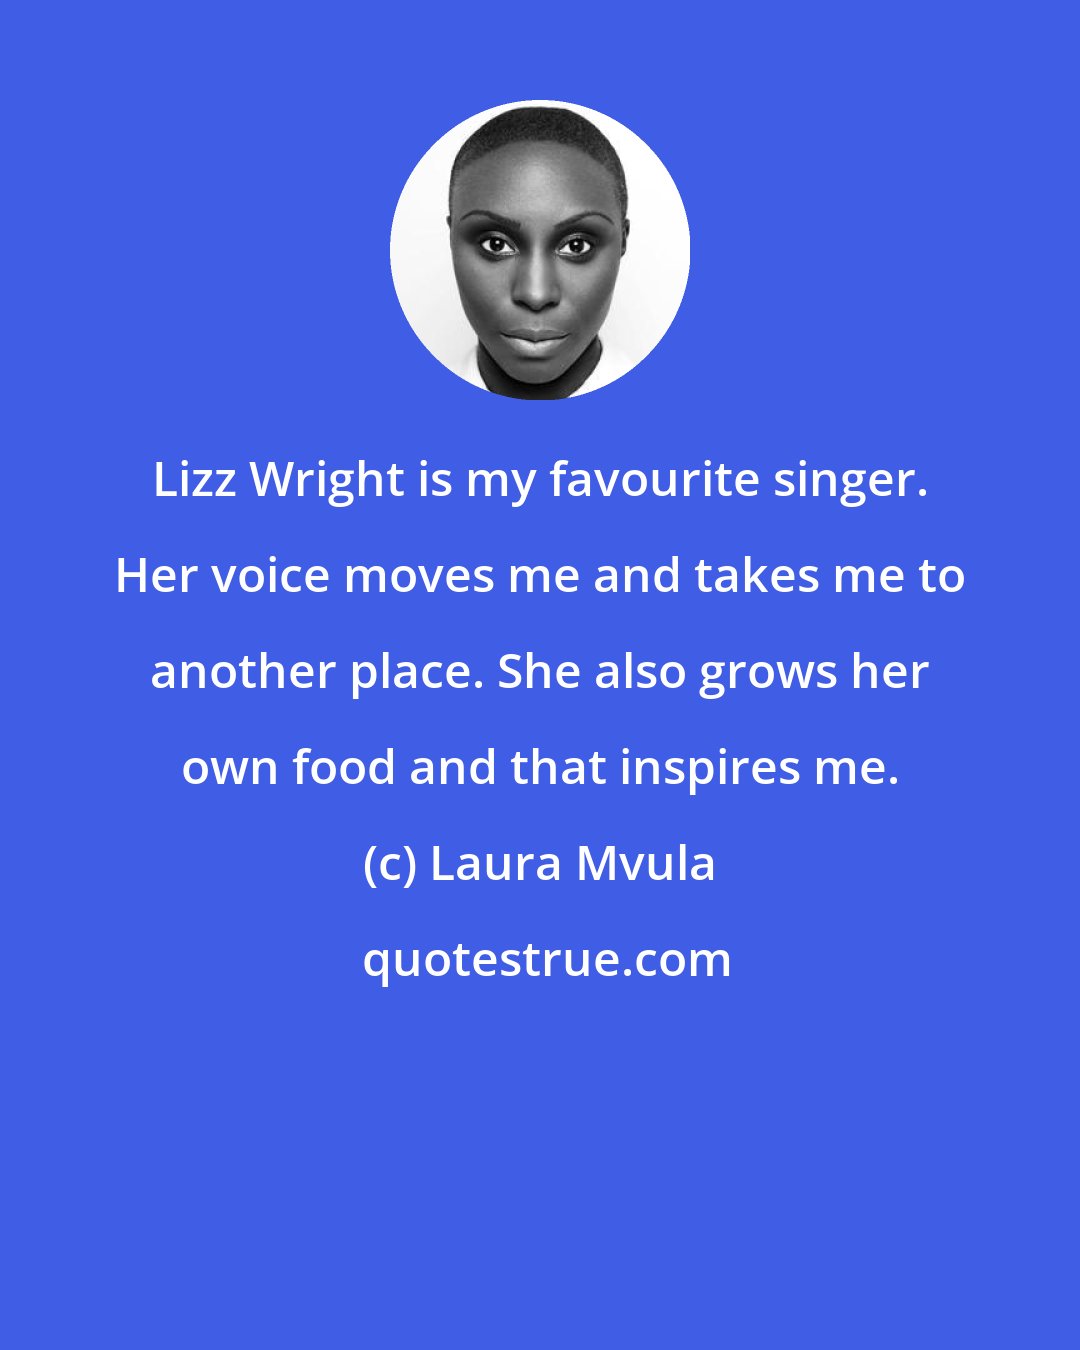 Laura Mvula: Lizz Wright is my favourite singer. Her voice moves me and takes me to another place. She also grows her own food and that inspires me.